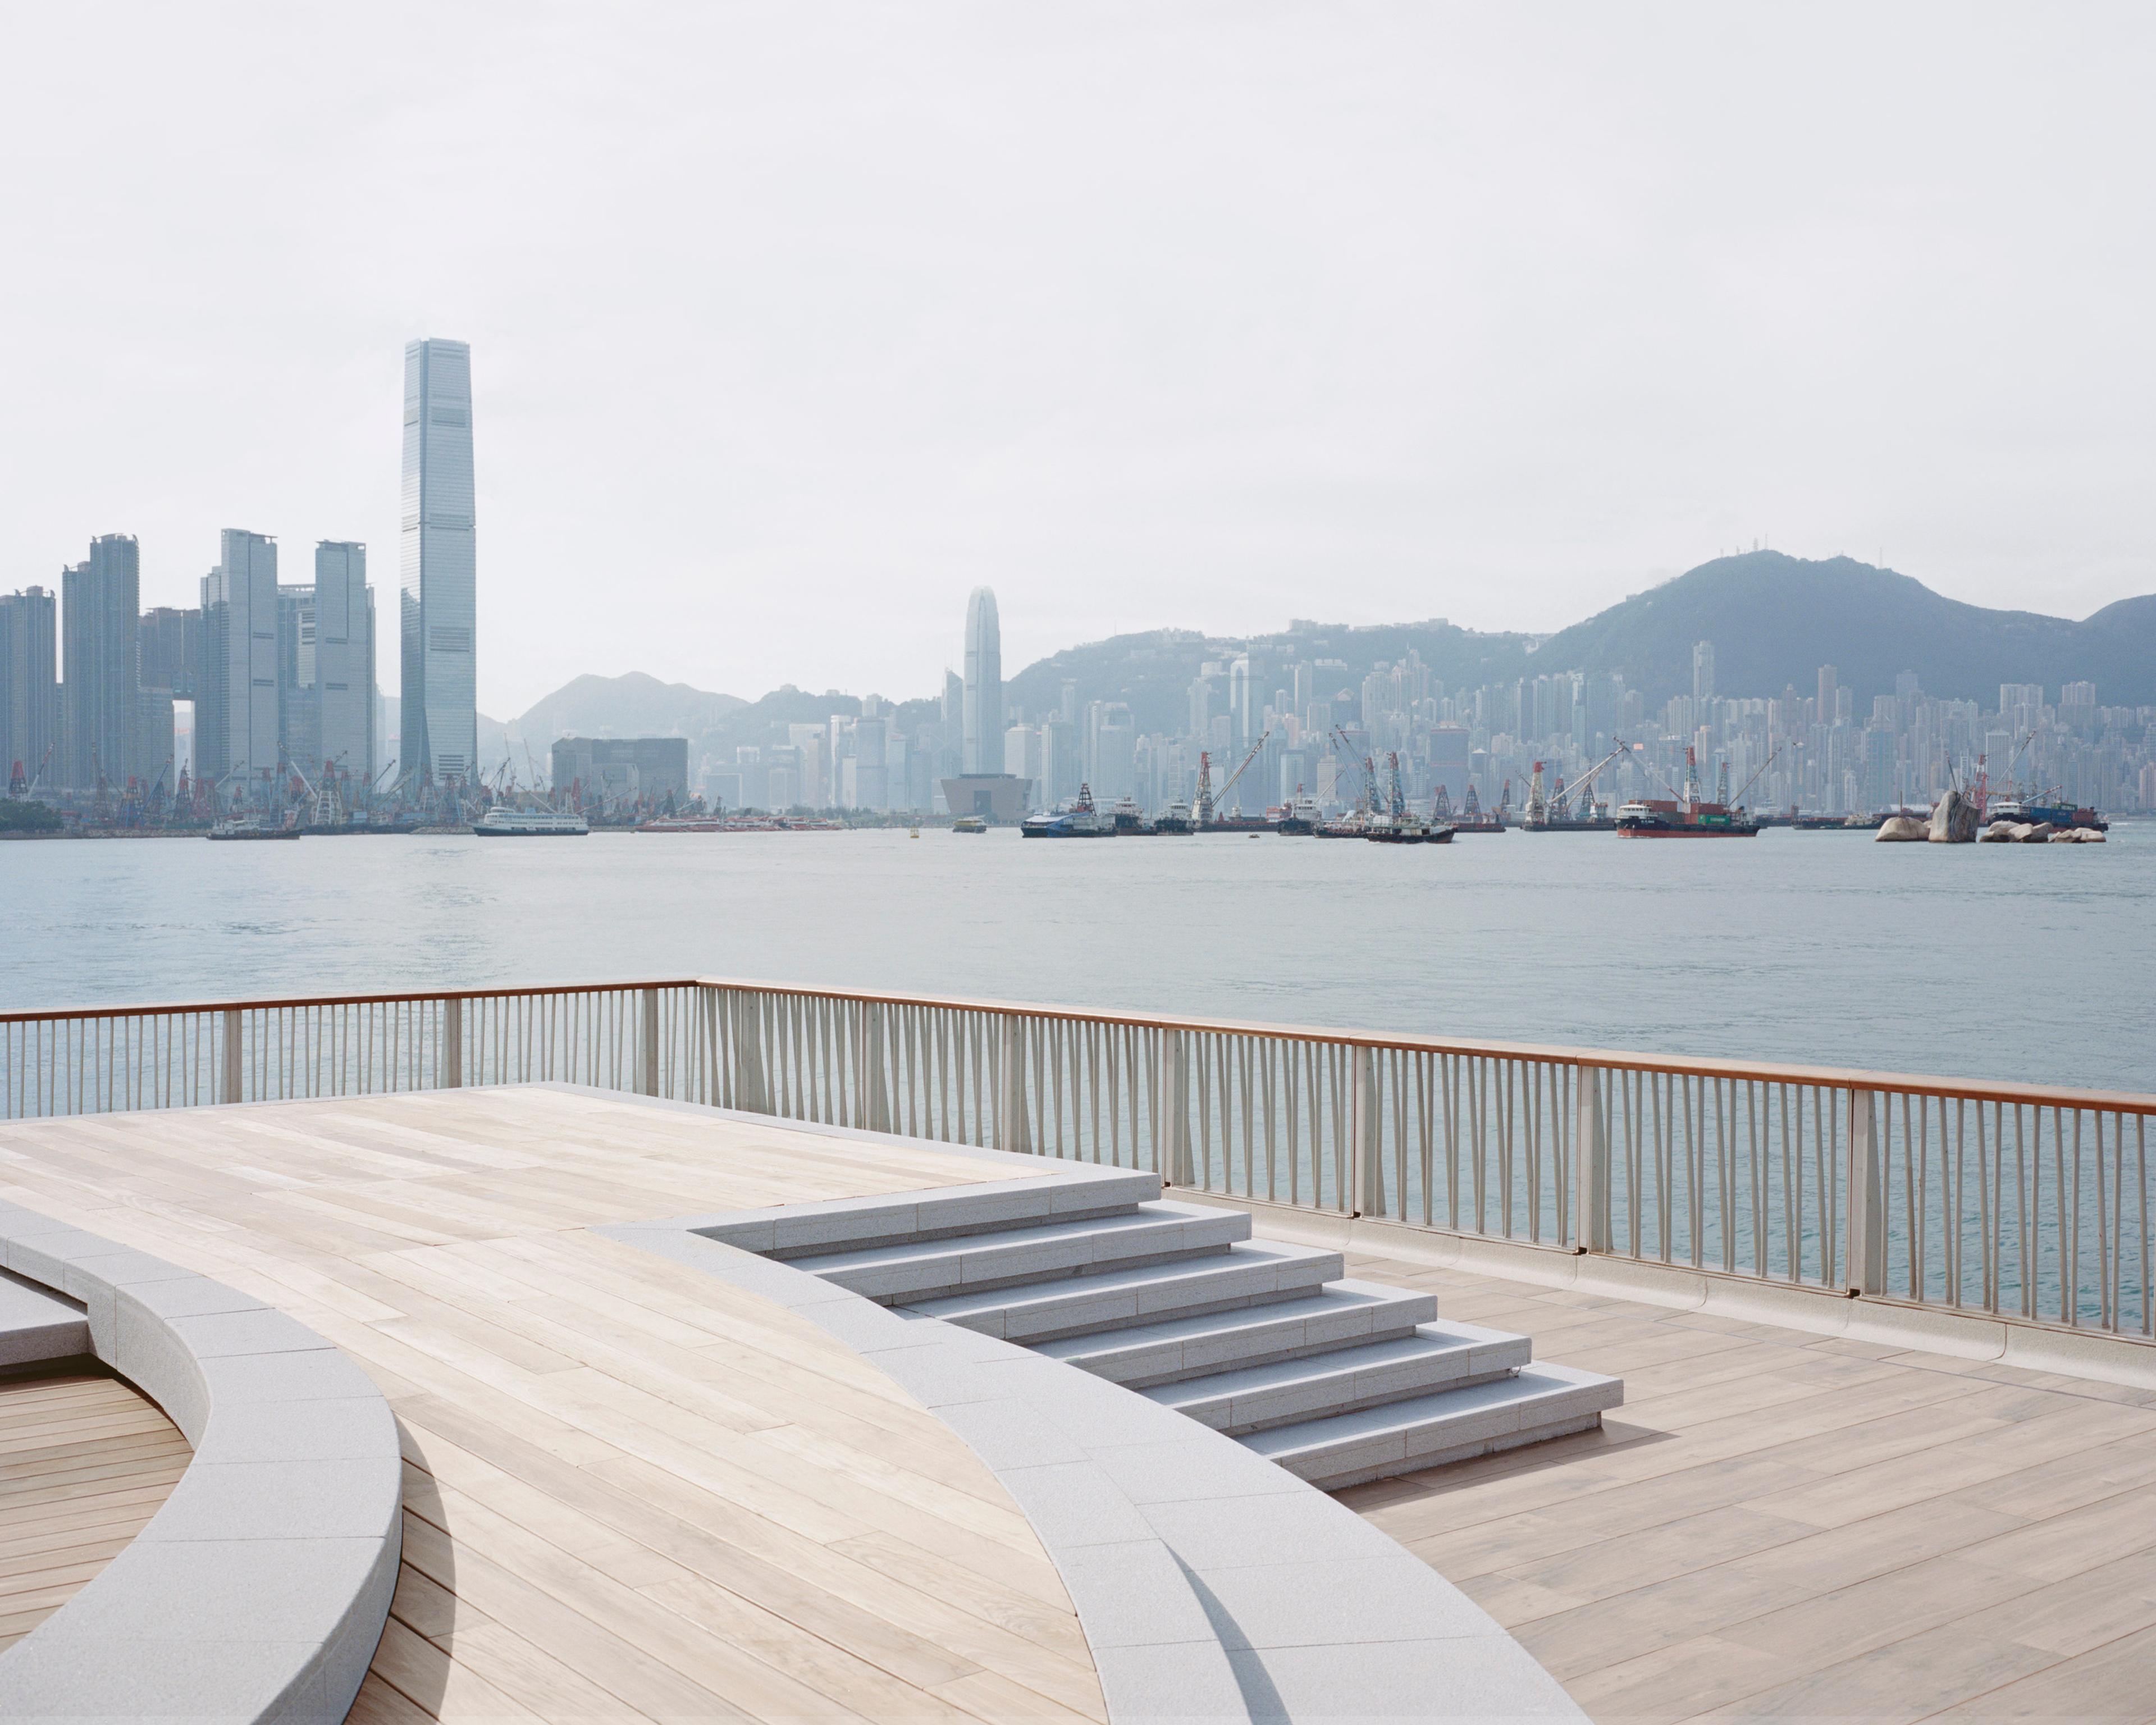 Curved steps with wood decking at end of pier overlooking Hong Kong harbour